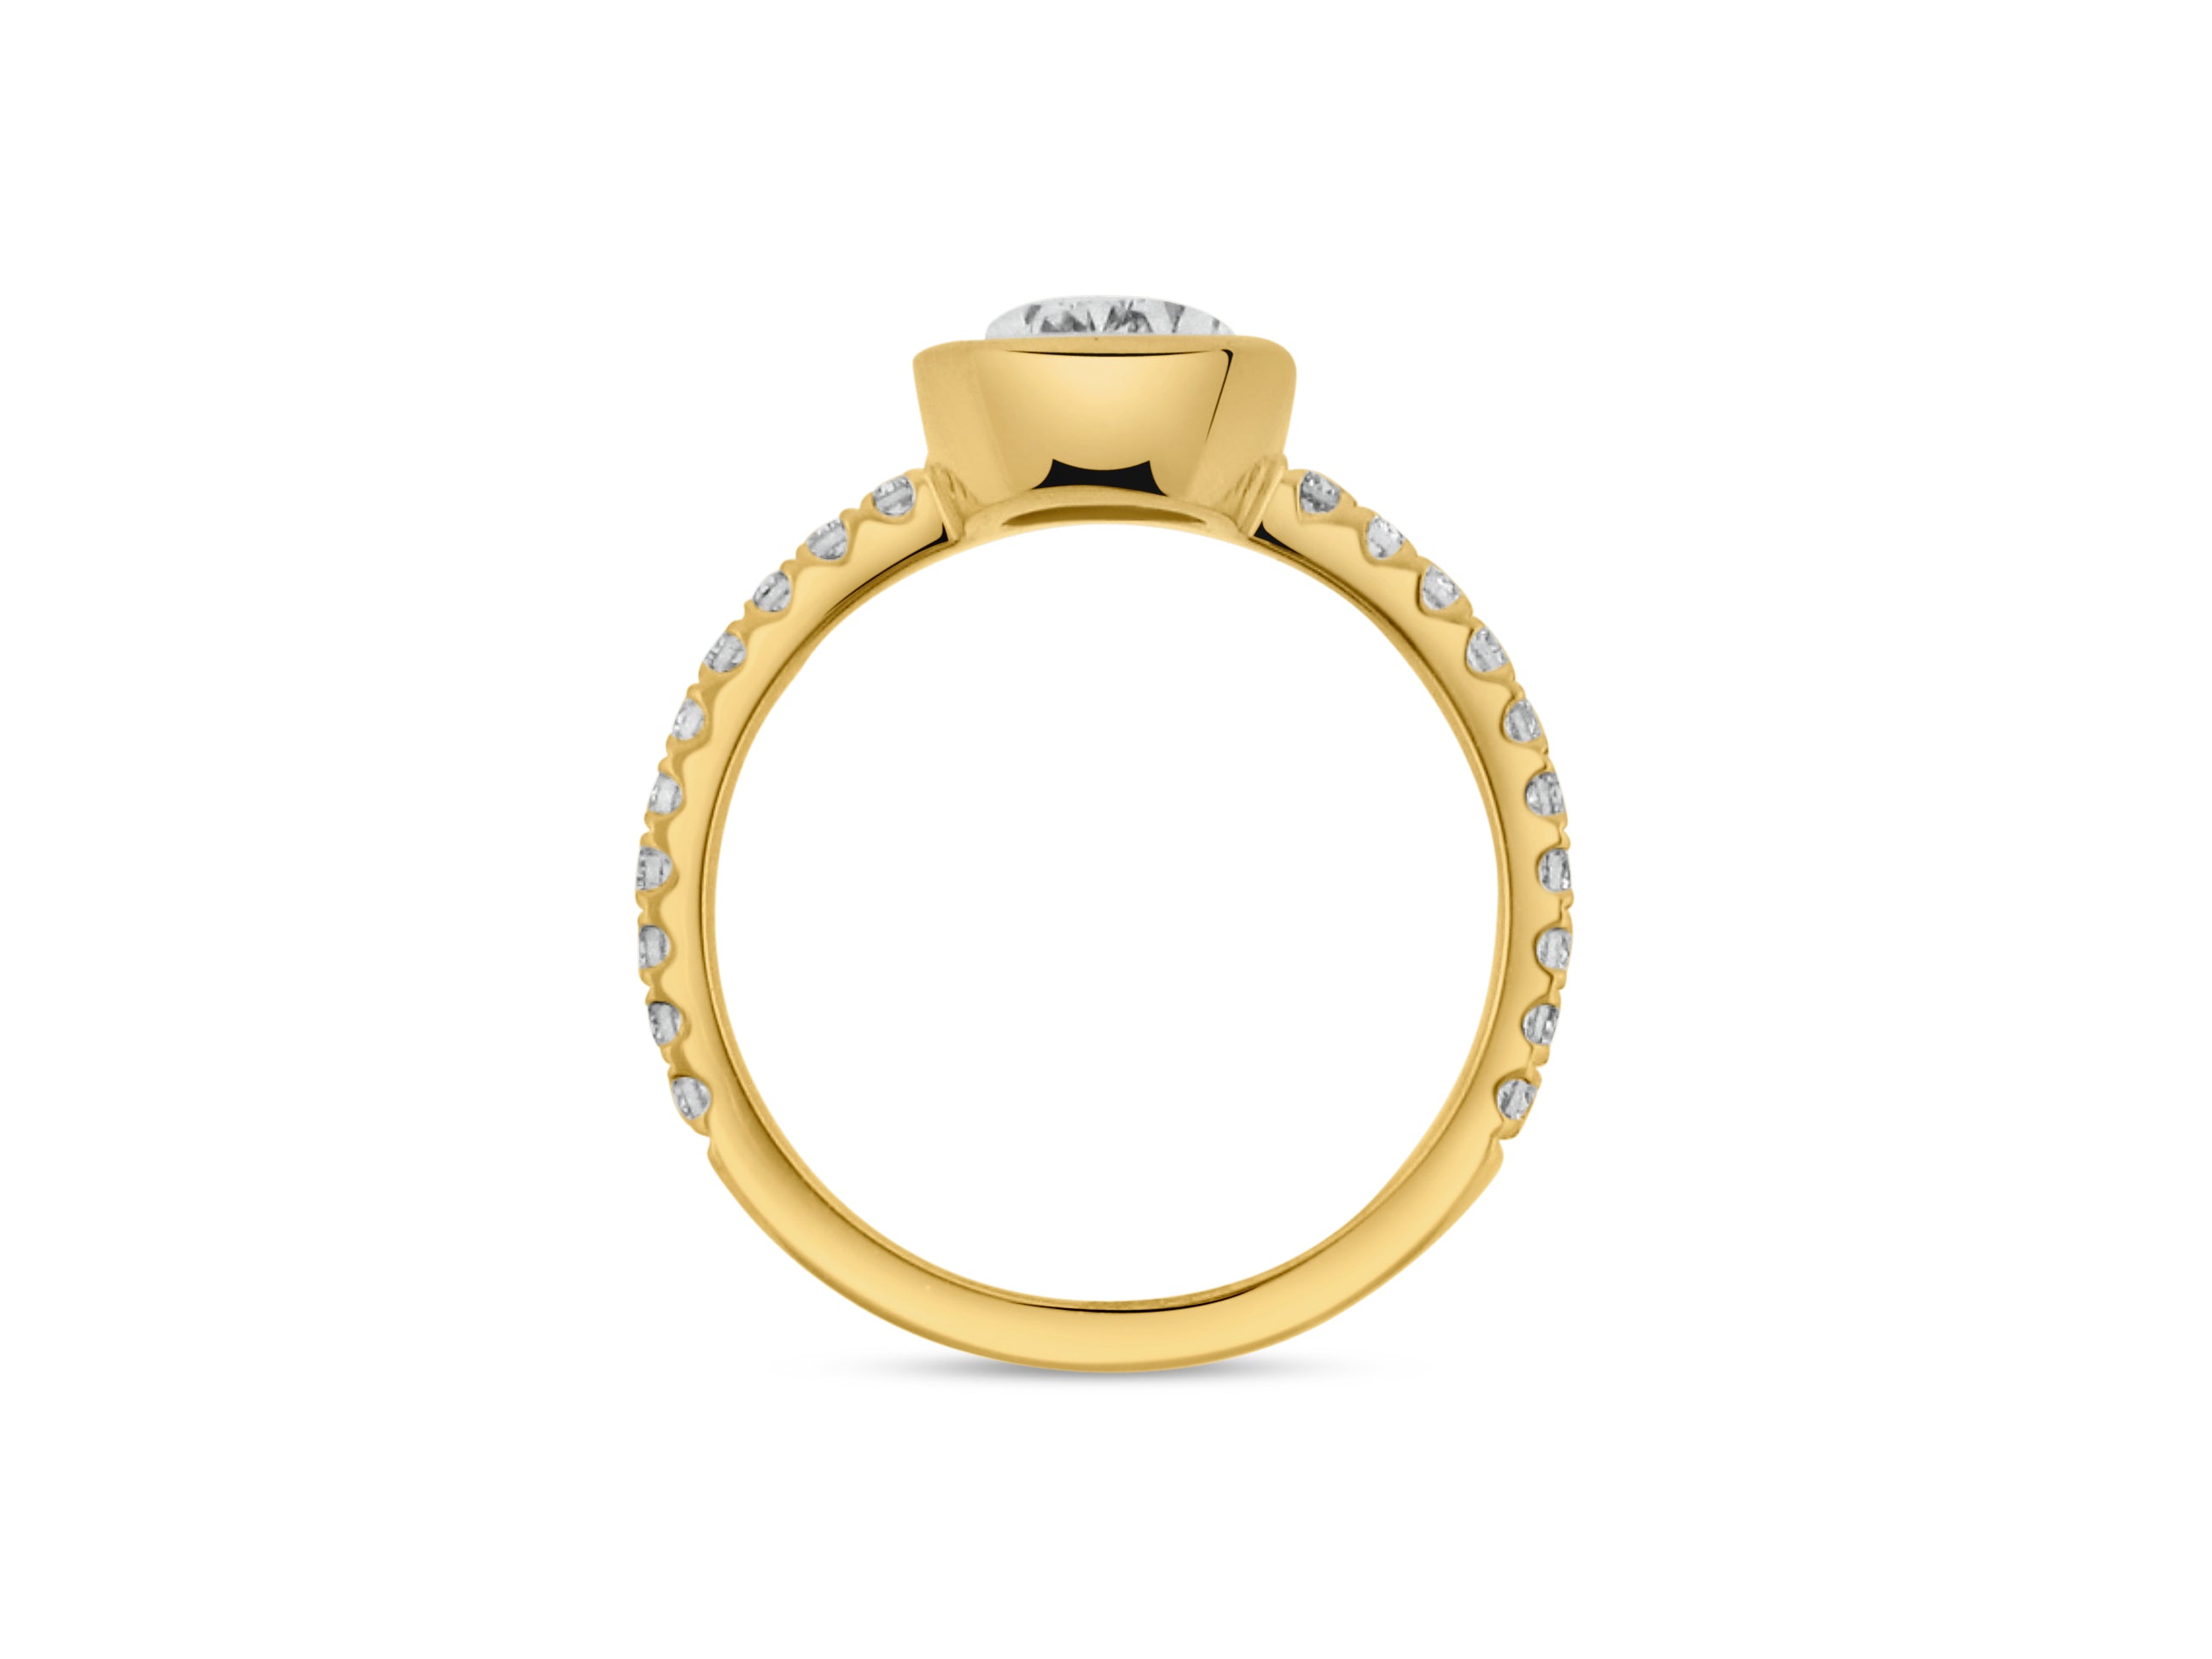 PRIVE' 18K YELLOW GOLD 1.70CT SI1 CLARITY AND F COLOR PEAR SHAPED SWAROVSKI LAB GROWN DIAMOND WITH .28CT NATURAL VS/SI-G ACCENT NATURAL DIAMONDS.